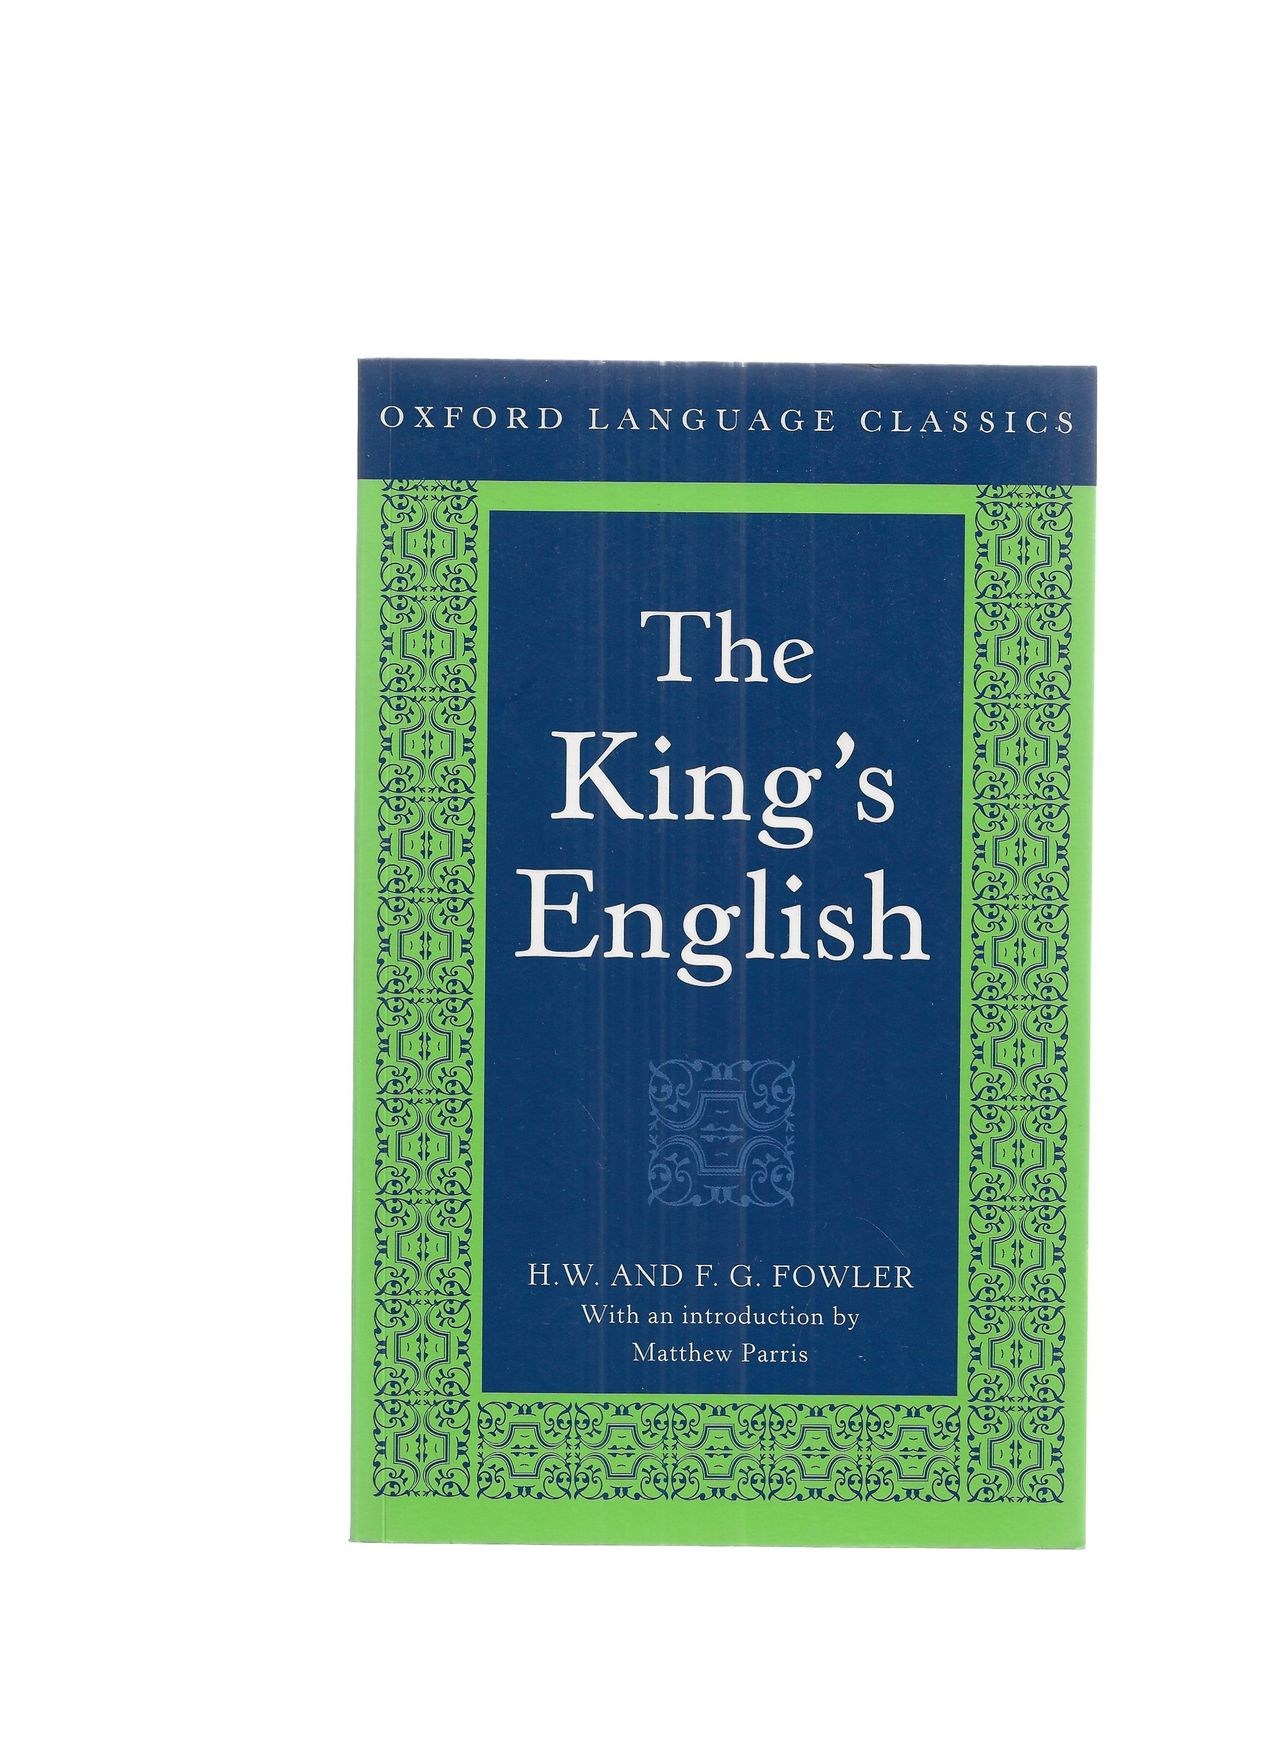 H.W. AND F.G. FOWLER Oxford Language Classics The King`s English 2003